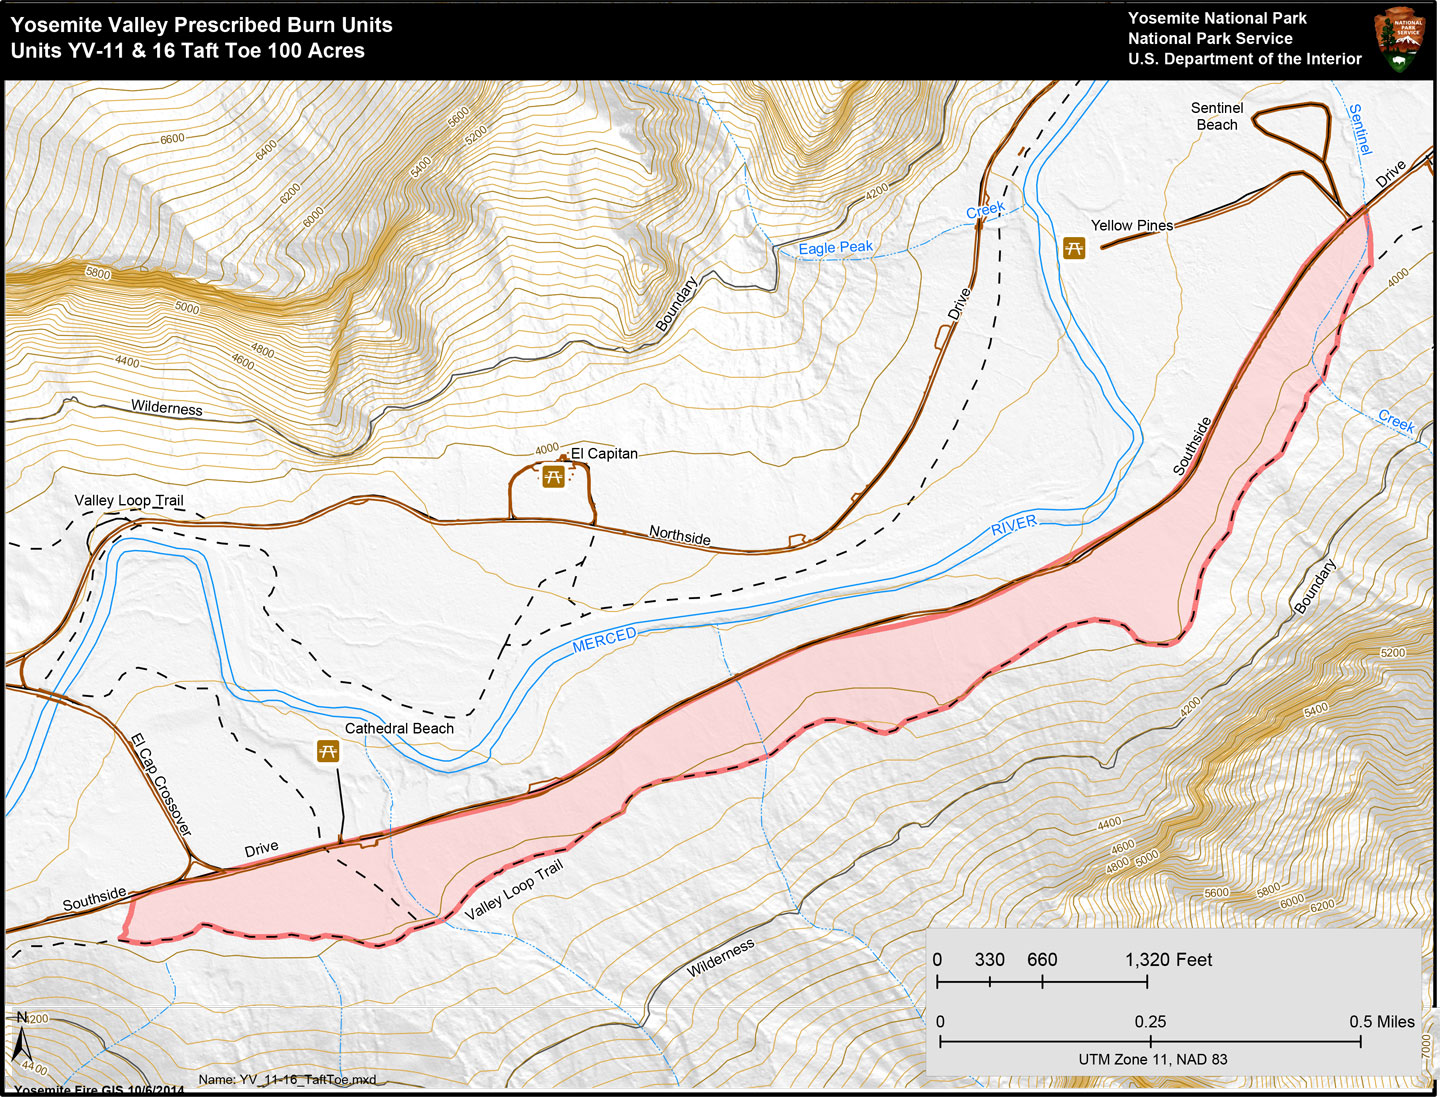 Map showing prescribed burn area south of Southside Drive and north of the cliff from El Capitan Crossover to Sentinel Beach